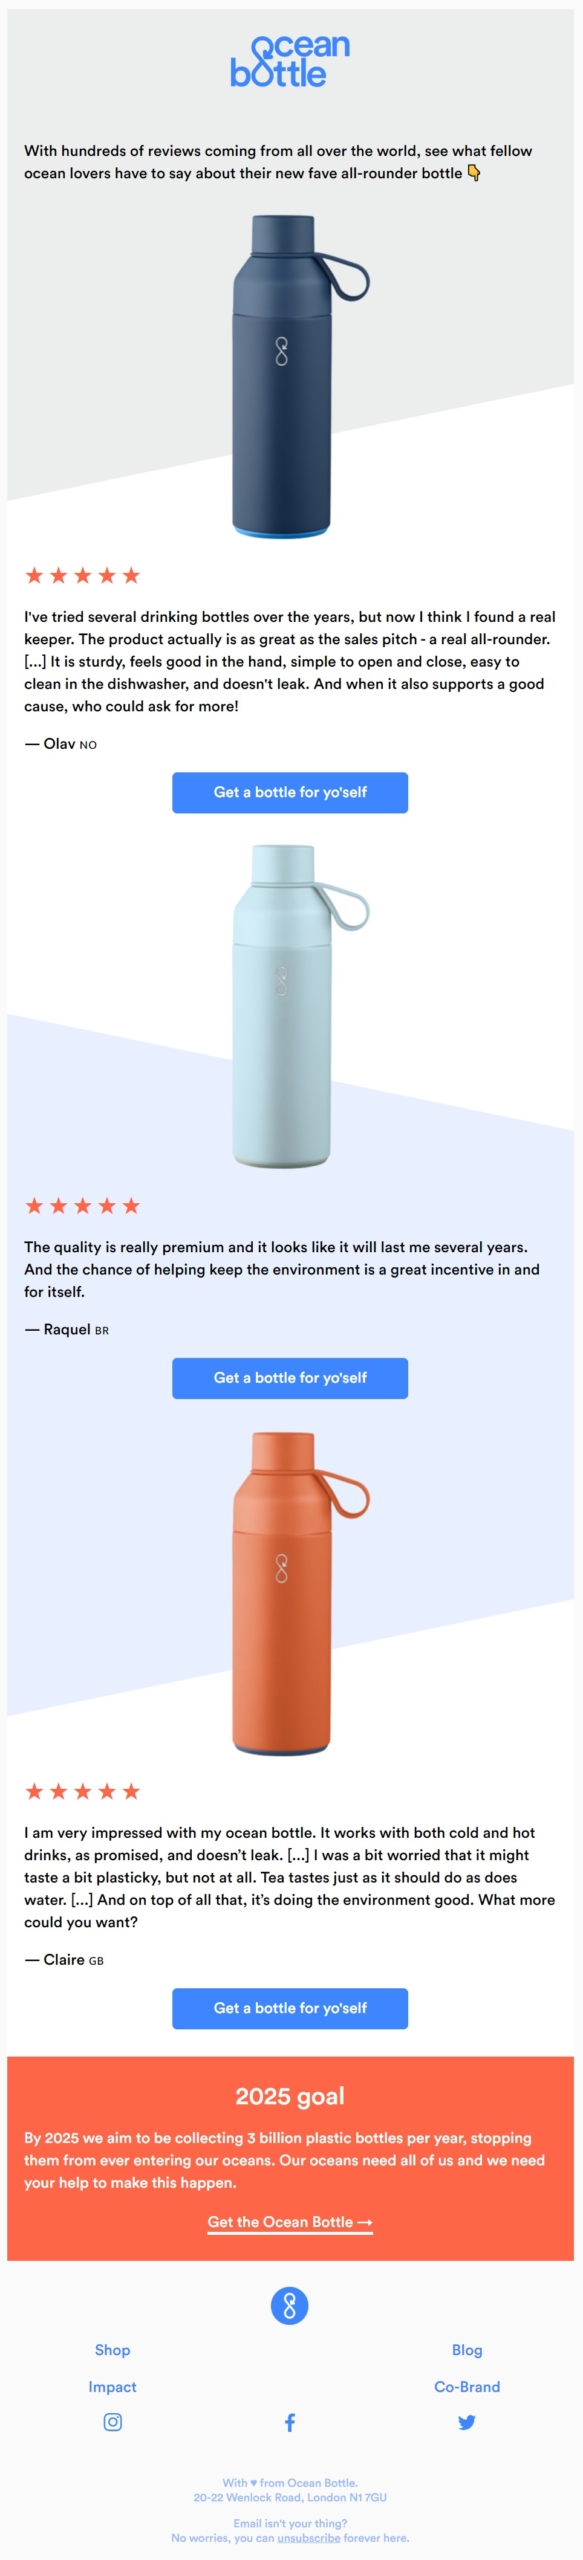 Welcome email from Ocean Bottle